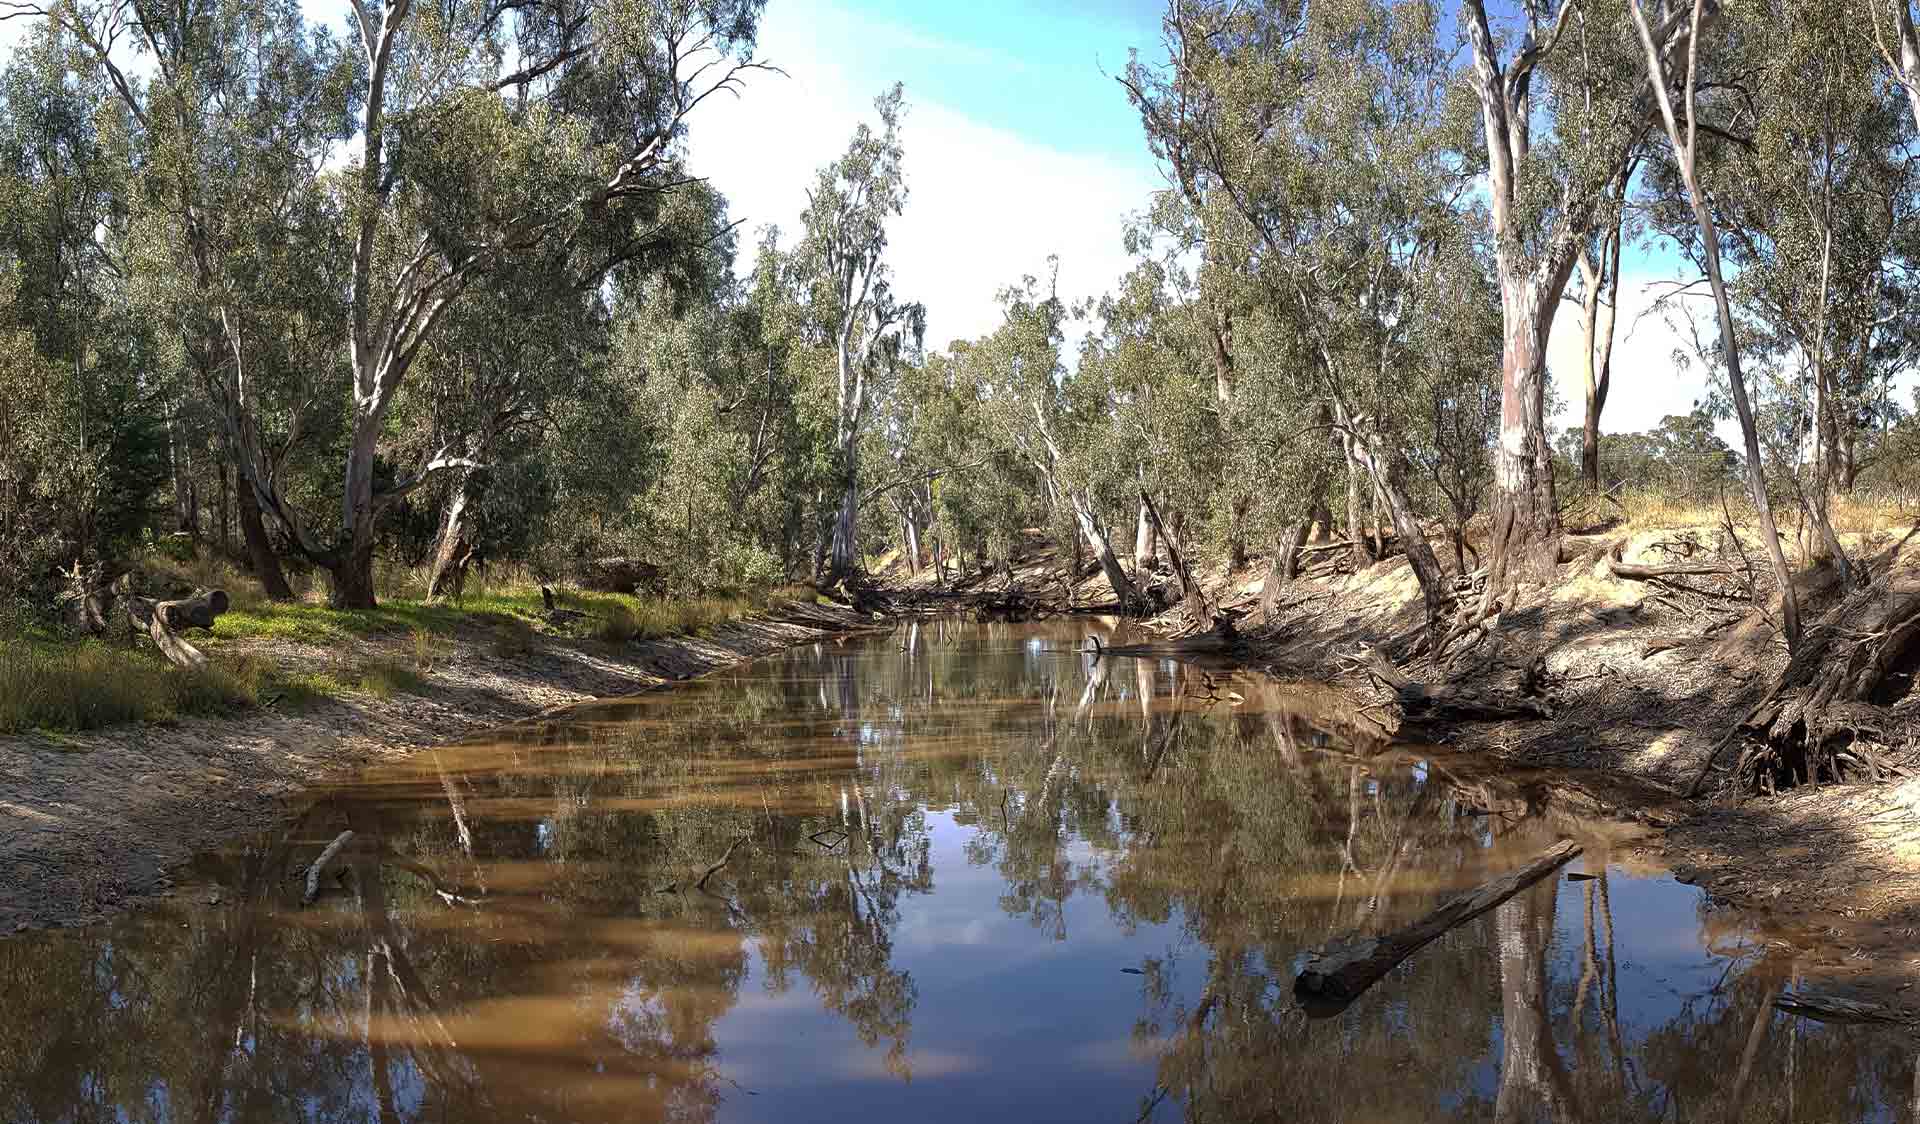 The reflection of the sky in the Ovens River wetlands in the Warby-Ovens National Park